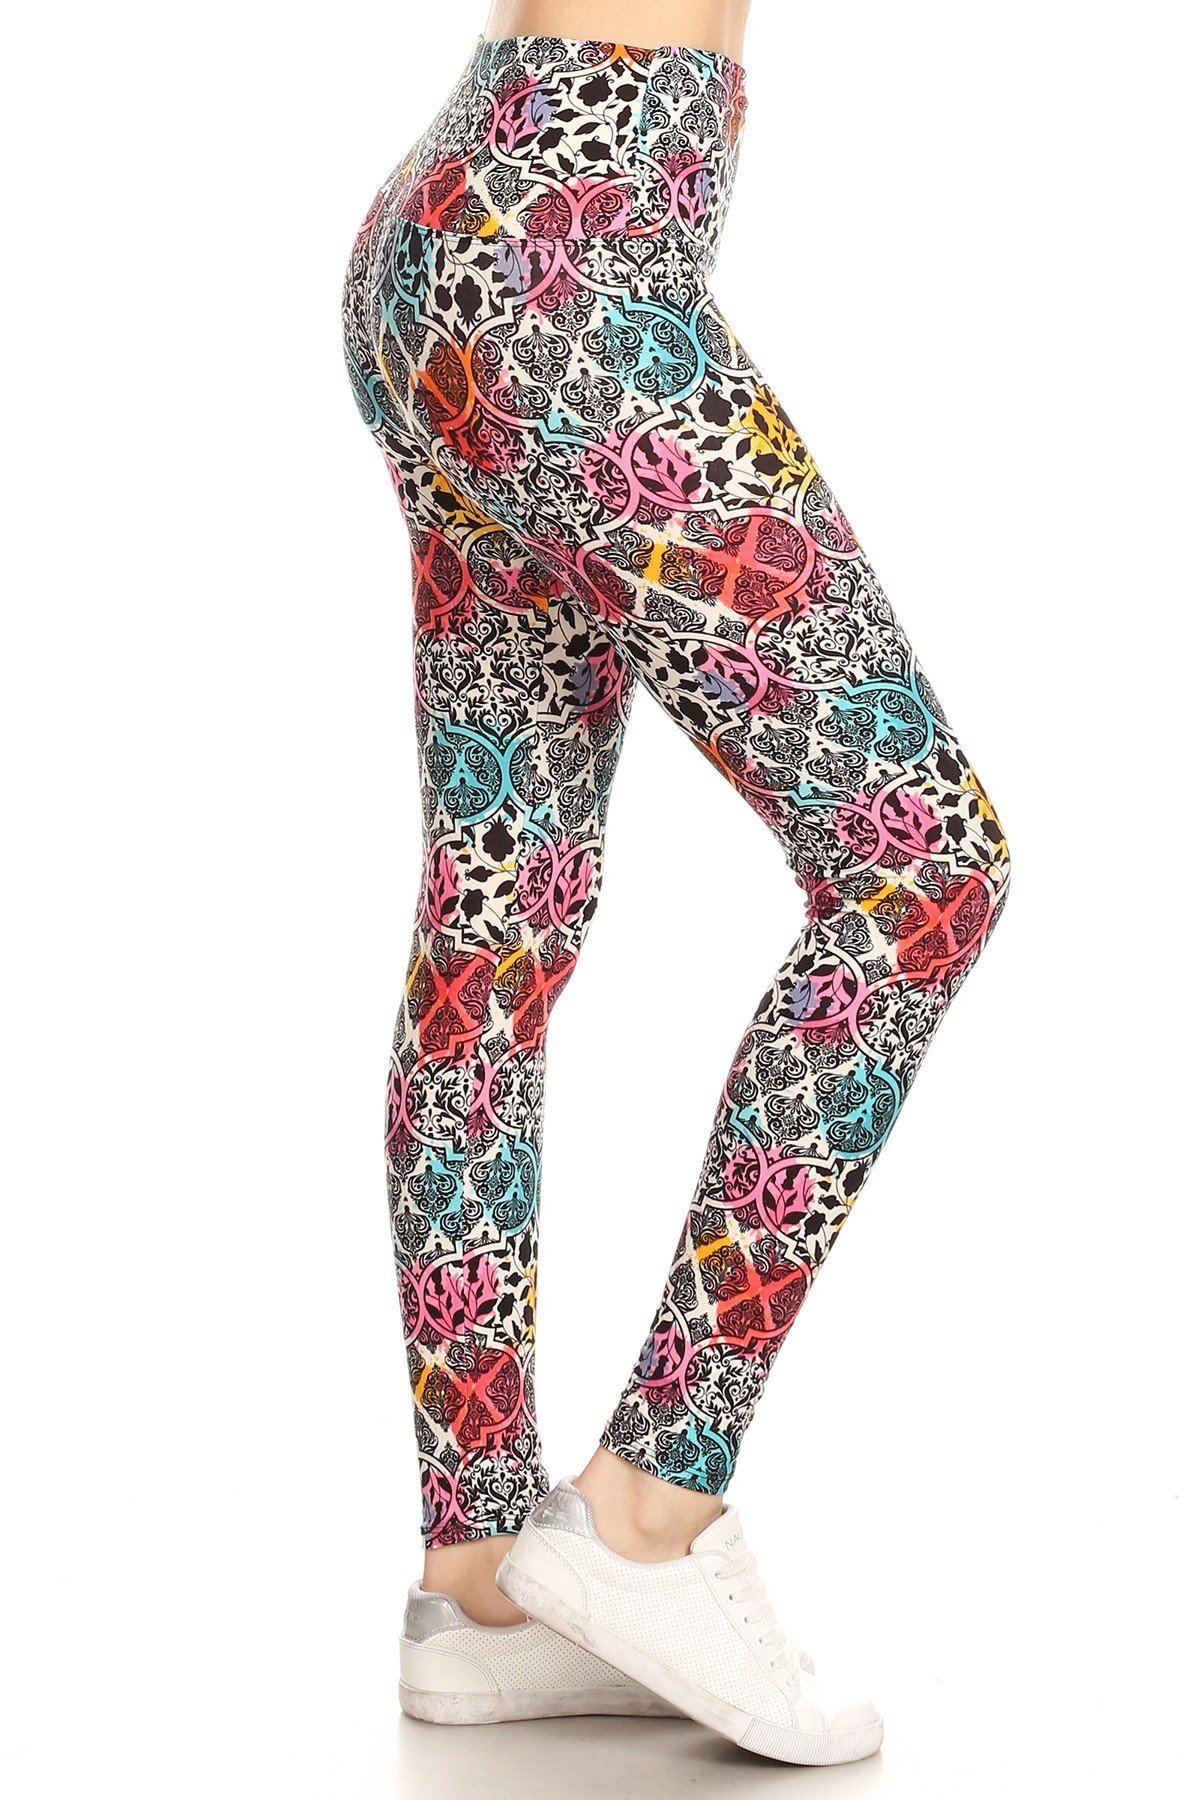 Long Yoga Style Banded Lined Damask Pattern Printed Knit Legging With High Waist